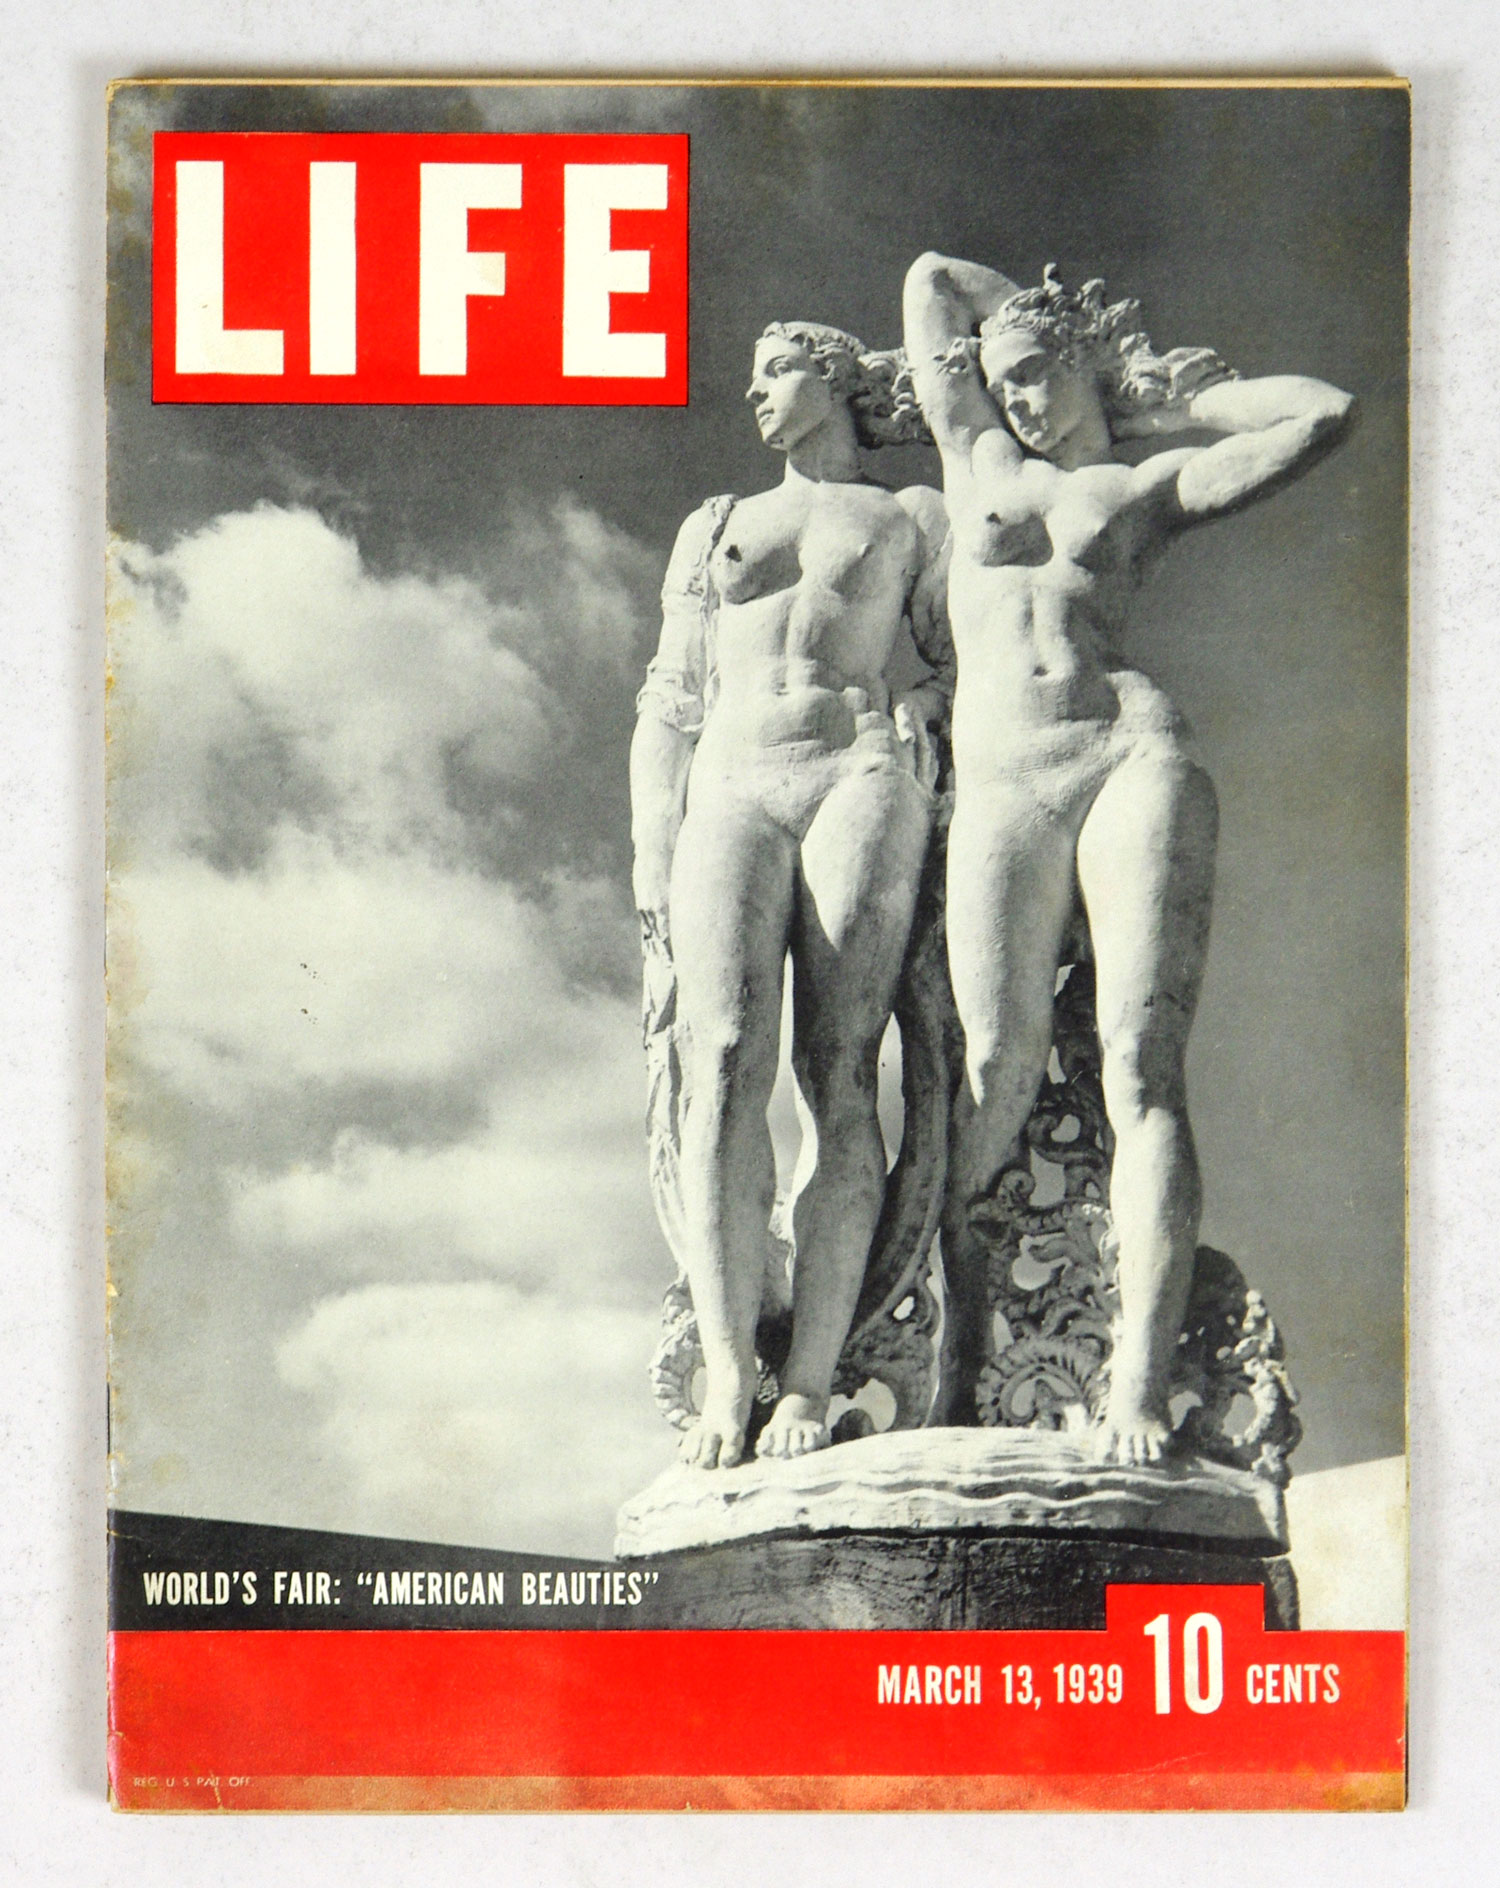 LIFE Magazine Back Issue 1939 March 13 World's Fair American Beauties